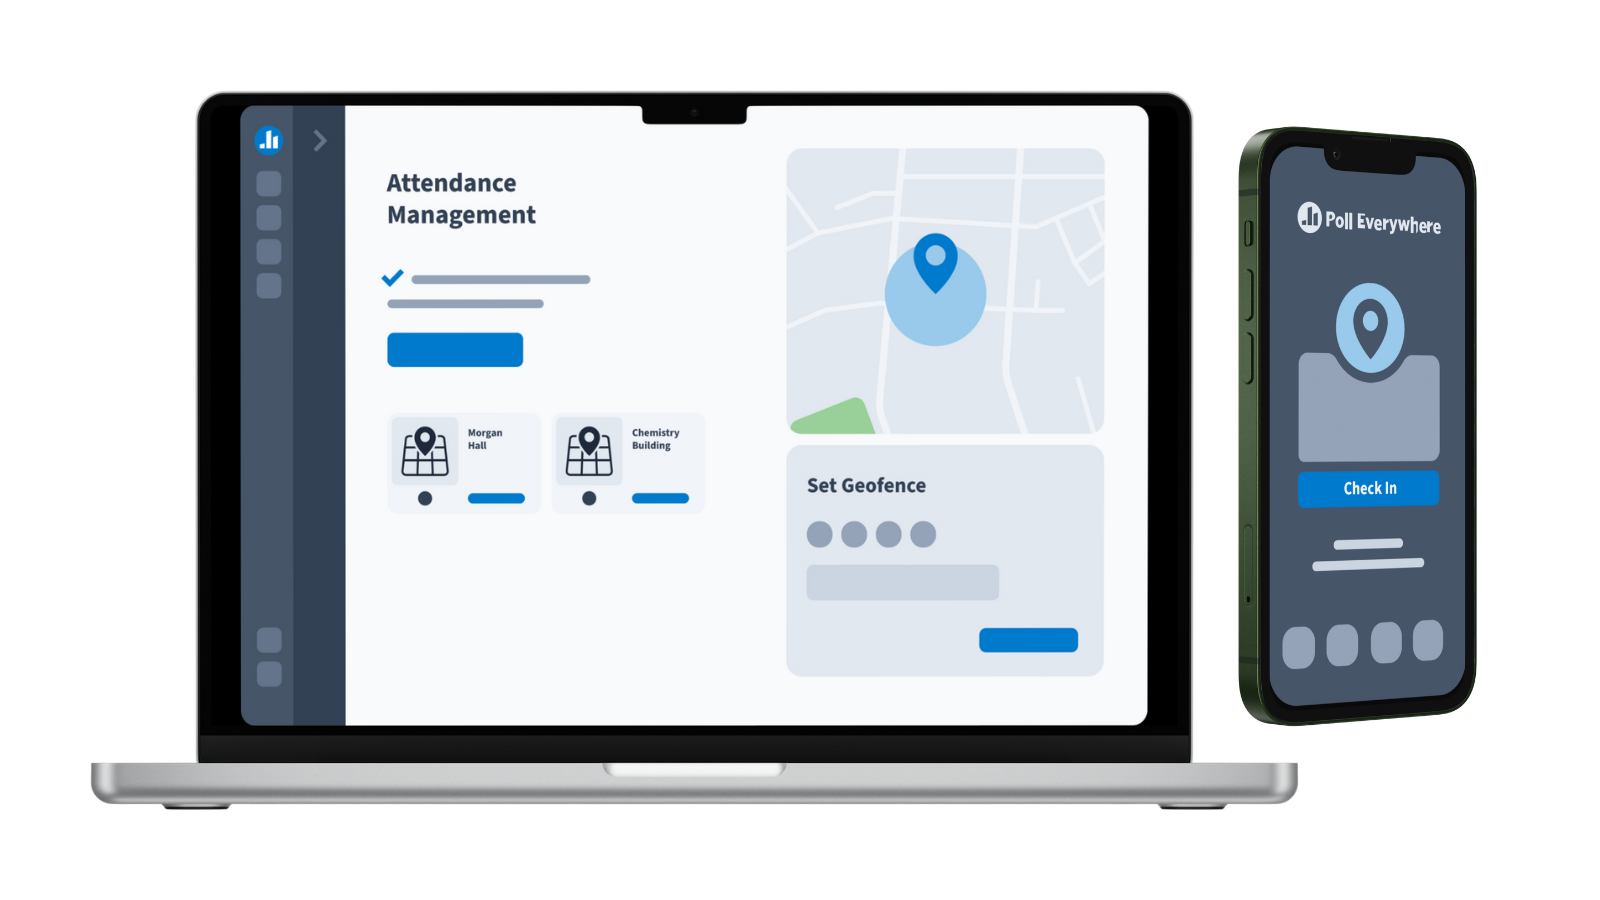 Attendance Management with Mobile Check In